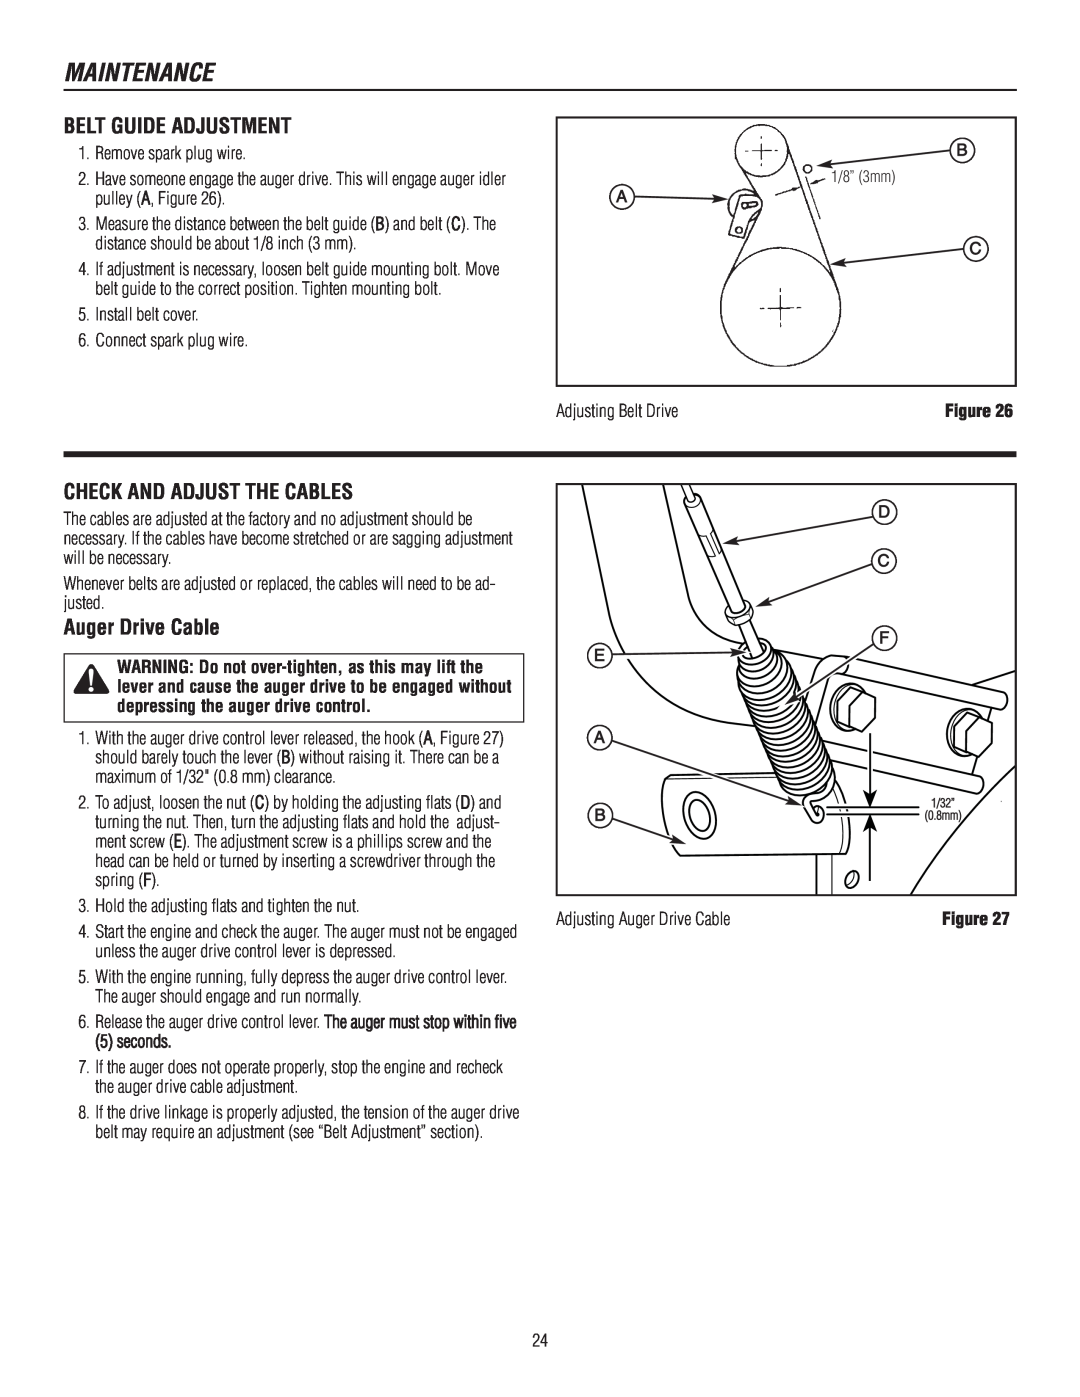 Murray 1695722, 1737920 manual Belt Guide Adjustment, Check And Adjust The Cables, Auger Drive Cable, Maintenance 